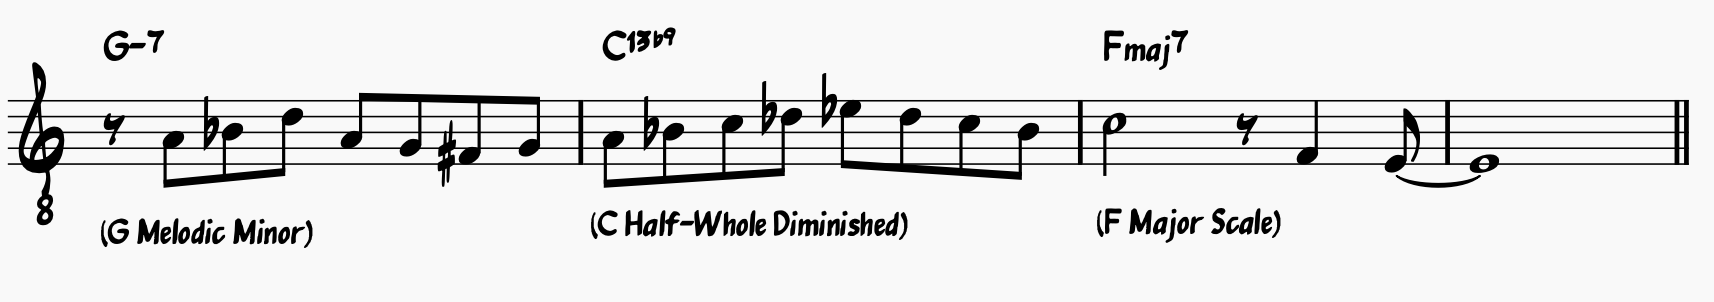 Major ii-V-I Lick that incorporates the diminished sound